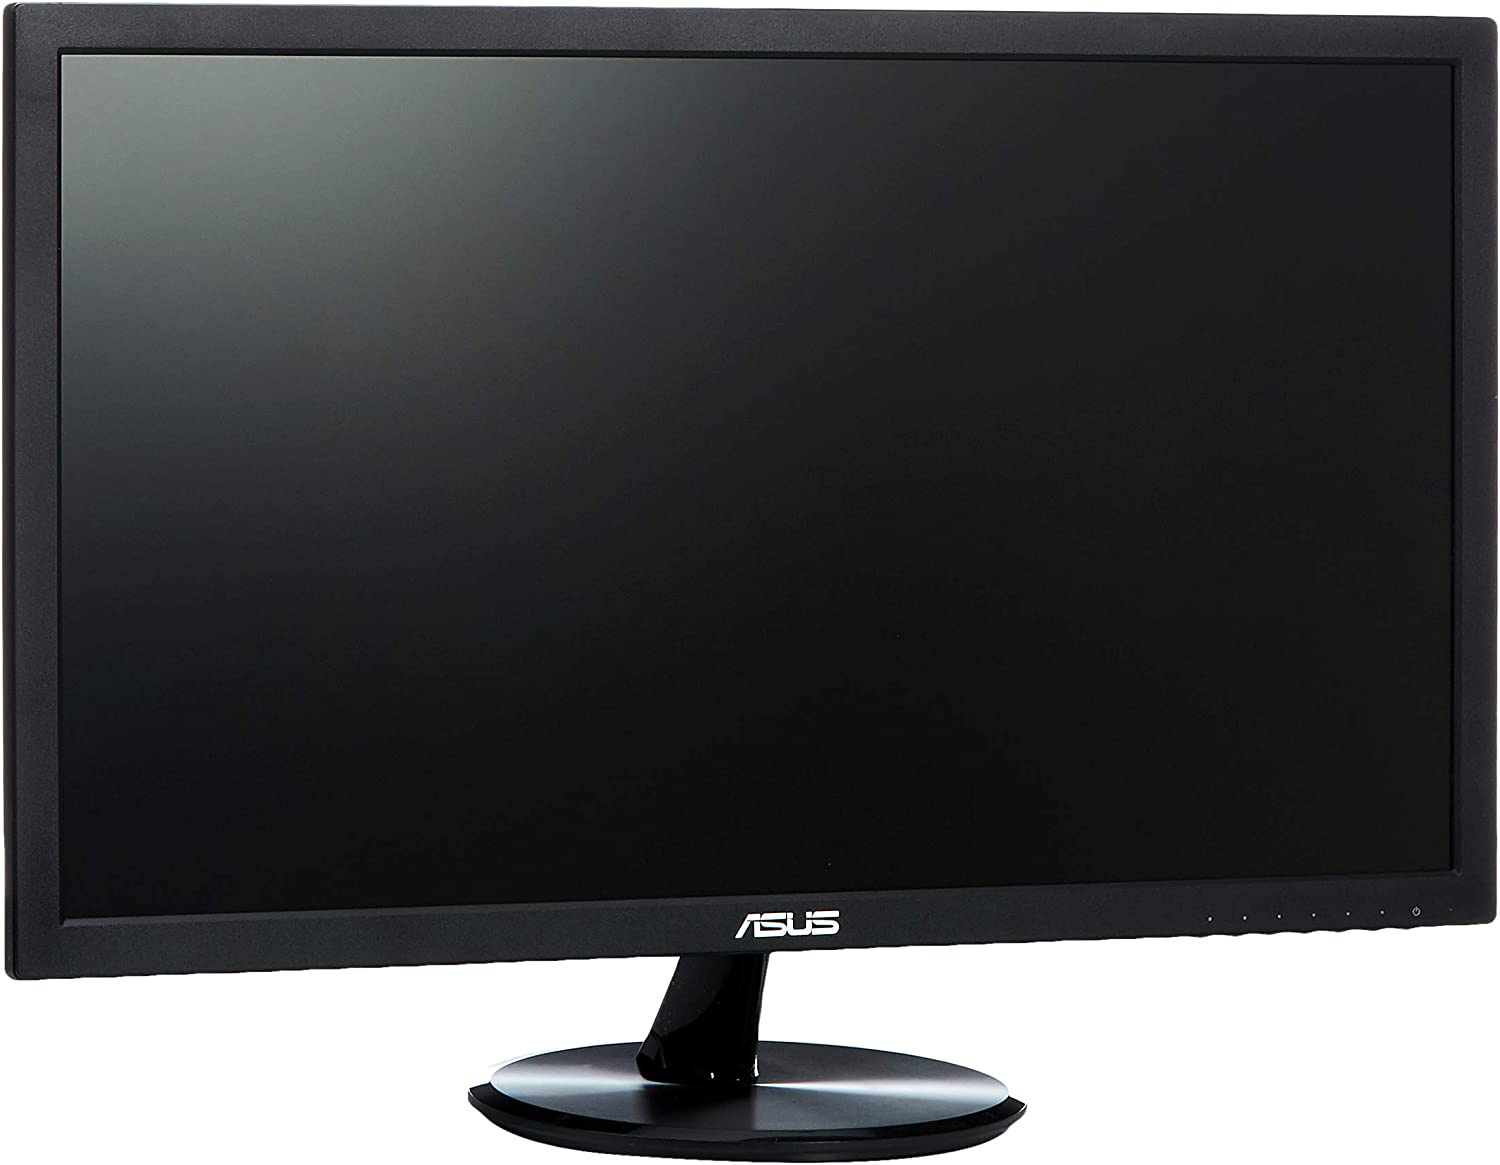 Asus Gaming Monitor, WLED, 24 Inch, IPS, FHD, 75 Hz, Adaptive-Sync, Blue Light Filter, VP248H